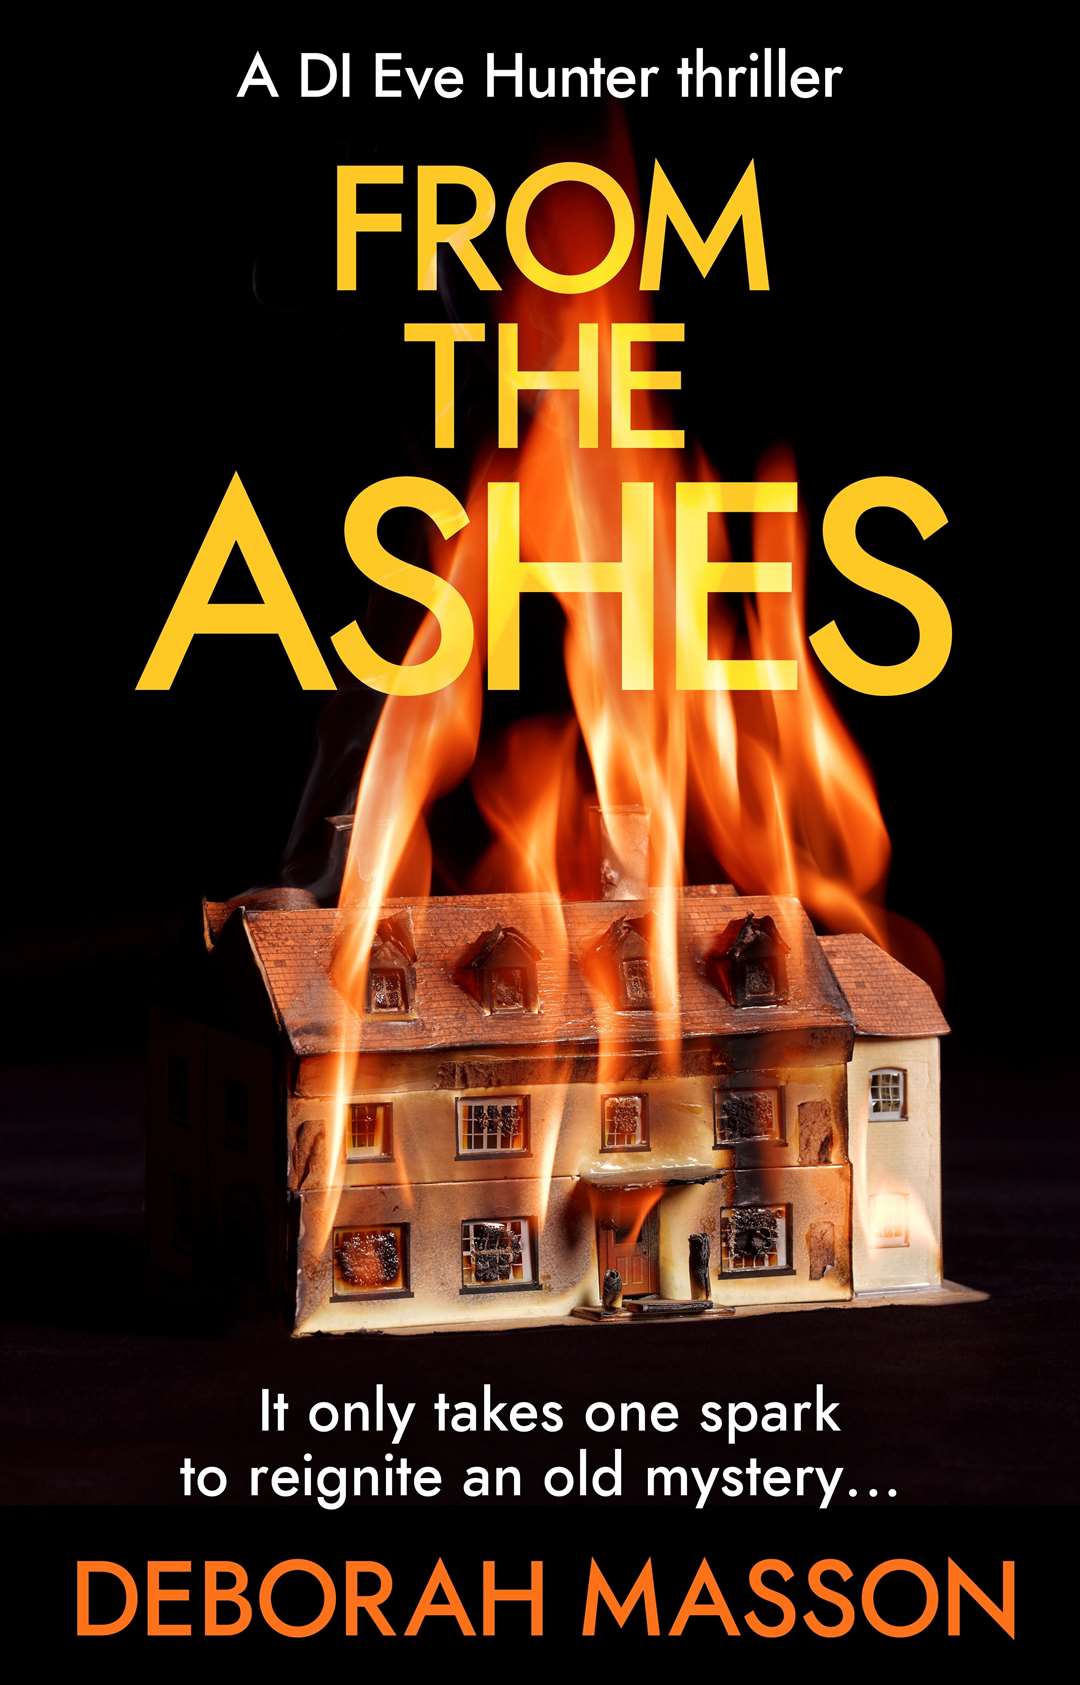 From the Ashes by Deborah Masson.